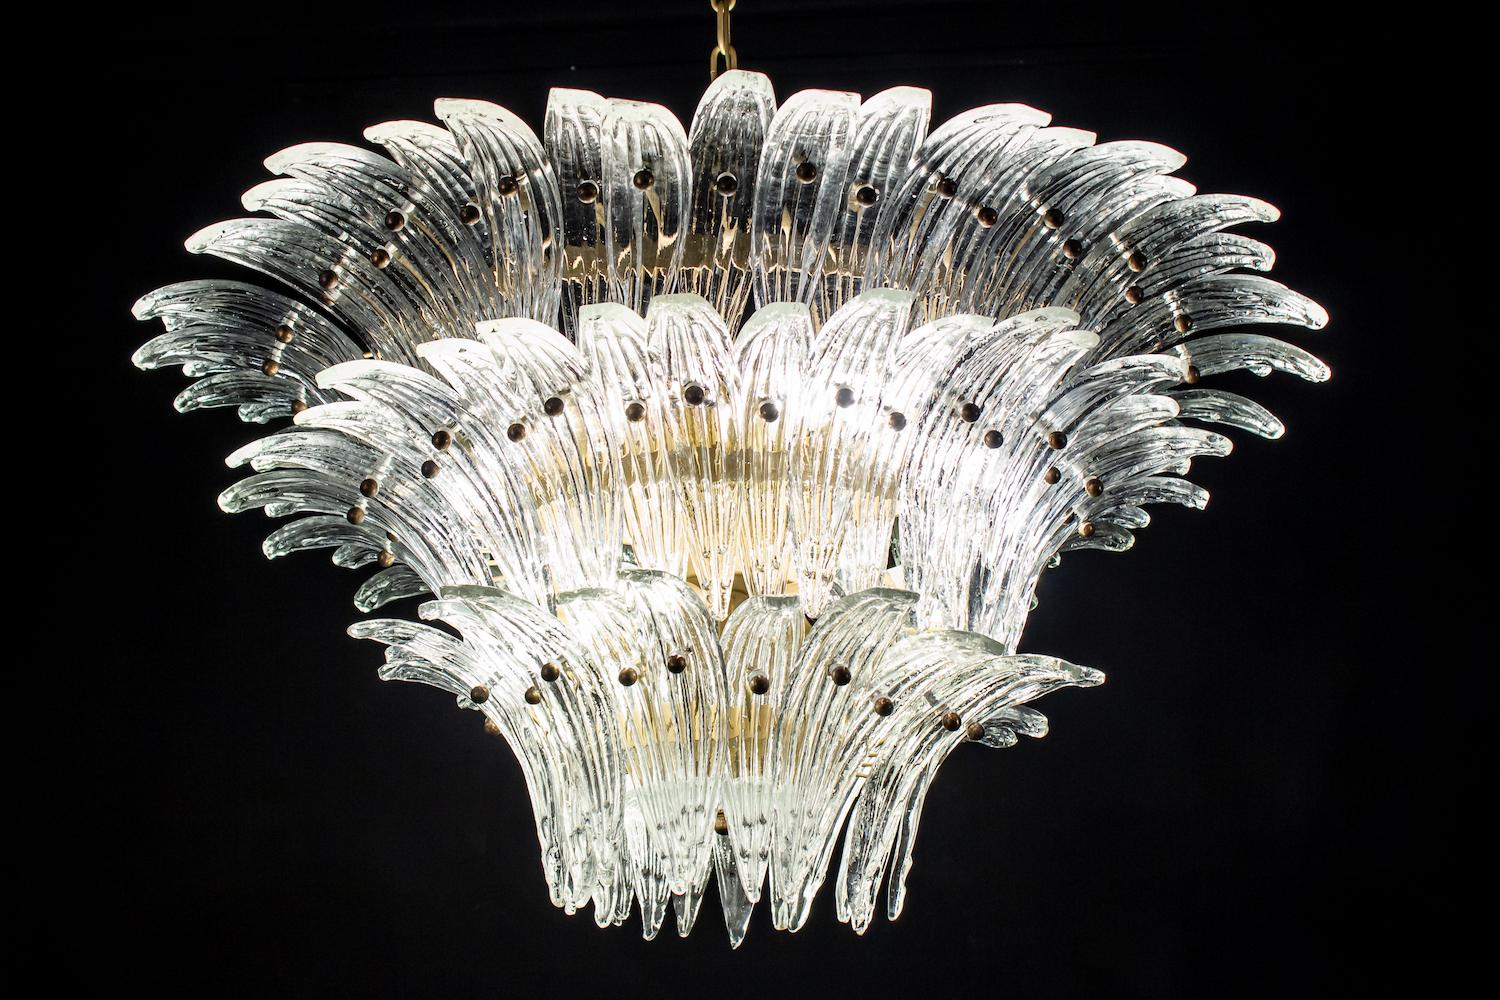 Luxury Palmette murano glass chandelier made with 94 original Murano  crystal glasses .
Gold color metal frame.
Available also a pair and a pair of sconces.
12-light bulbs, E27 dimension
Dimensions: Chandelier 43.30 inches (110 cm), height with